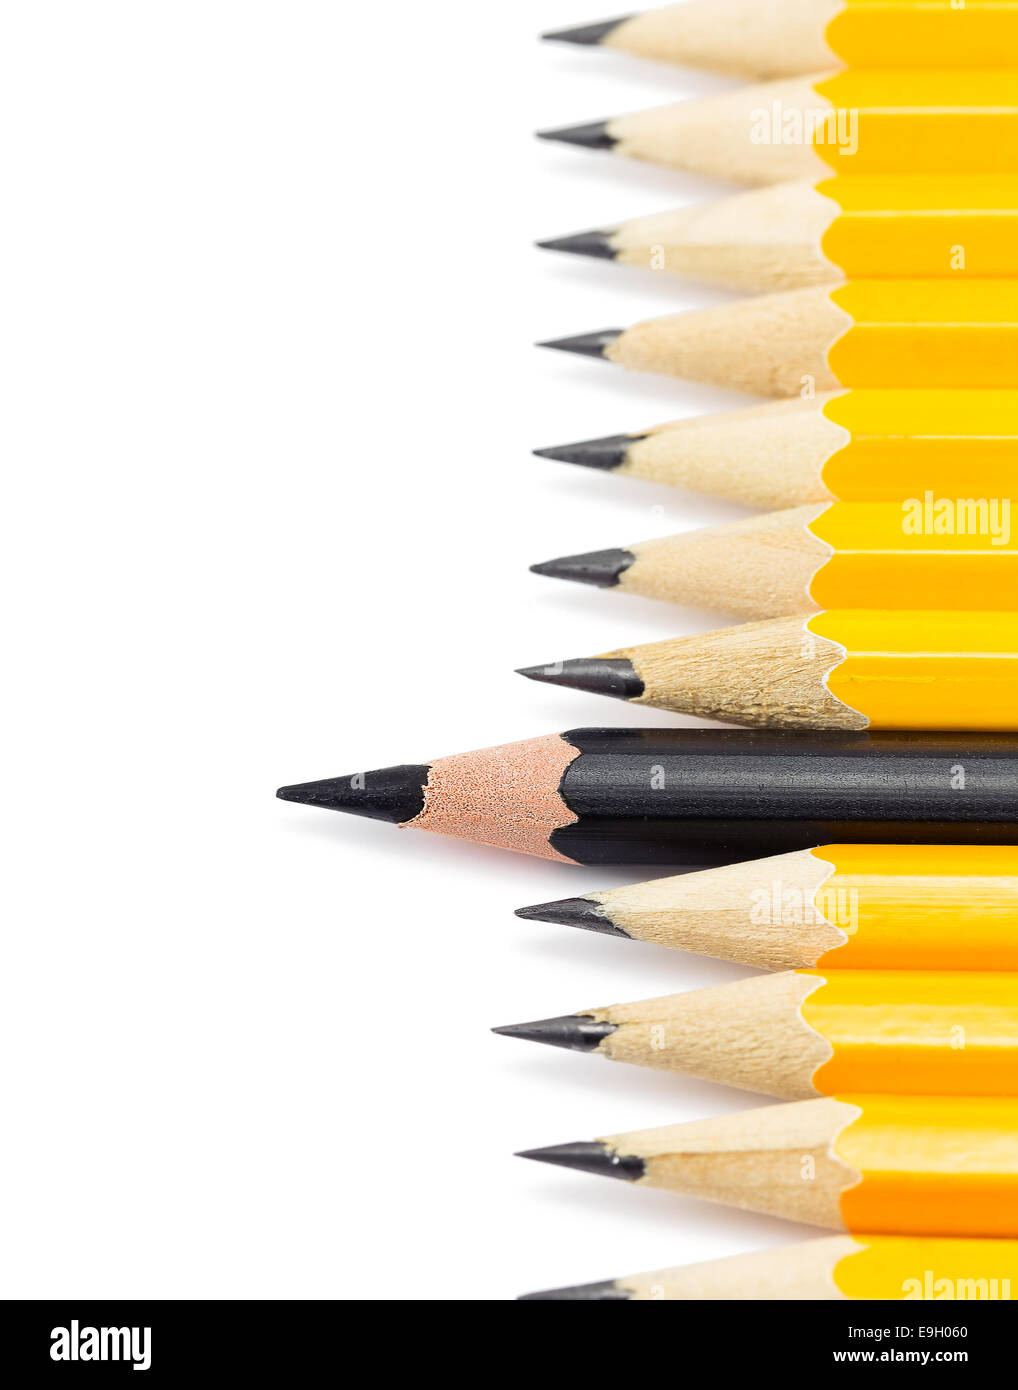 Colorful Pencils and Markers Stock Photo - Image of yellow, black: 20288278